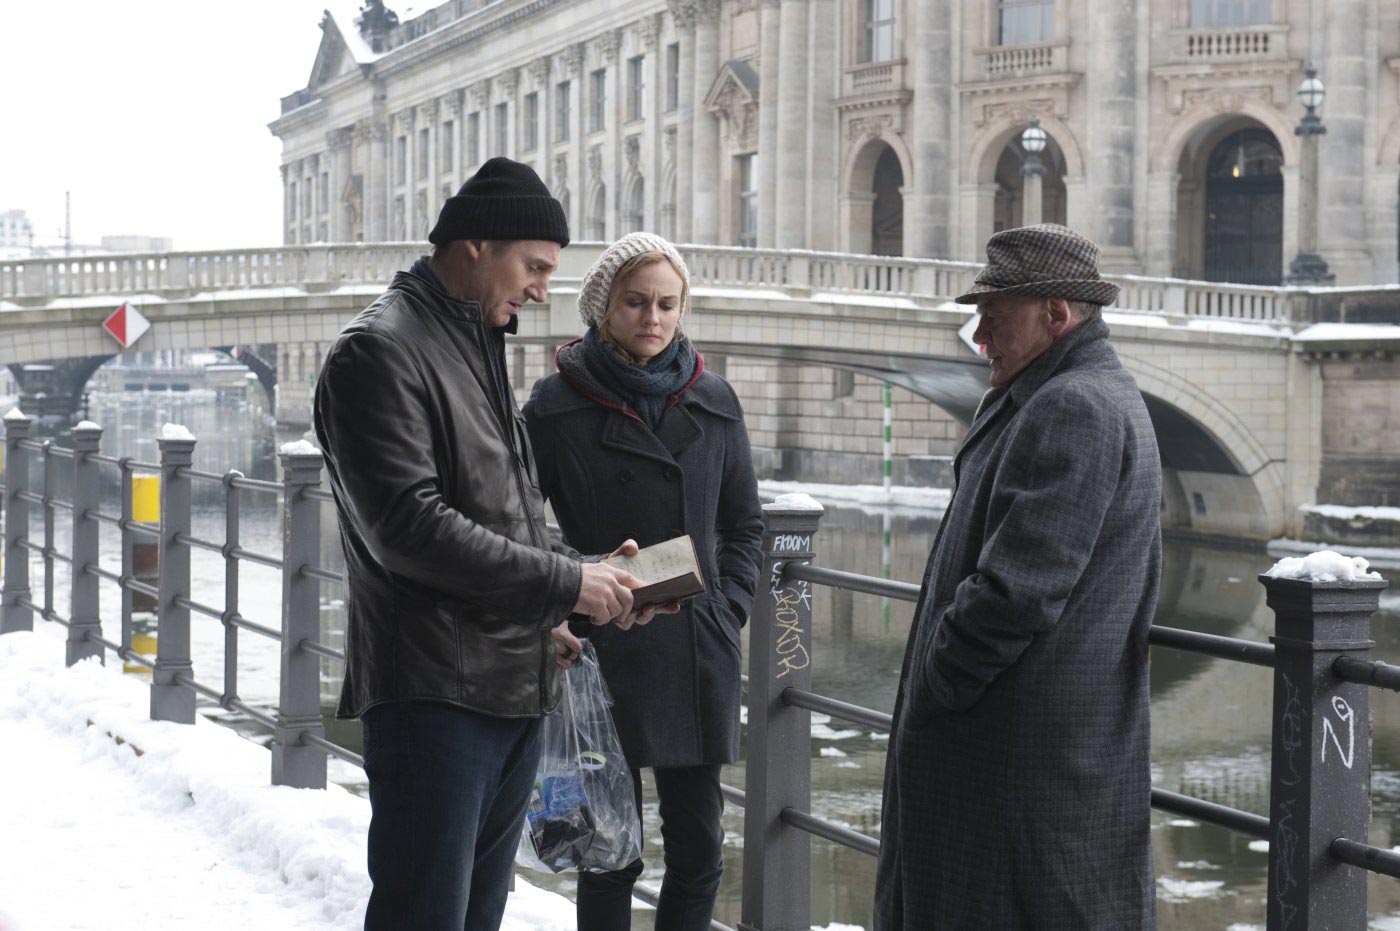 Diane Kruger as Gina, Liam Neeson as Dr. Martin Harris and Bruno Ganz as Jurgen in Unknown